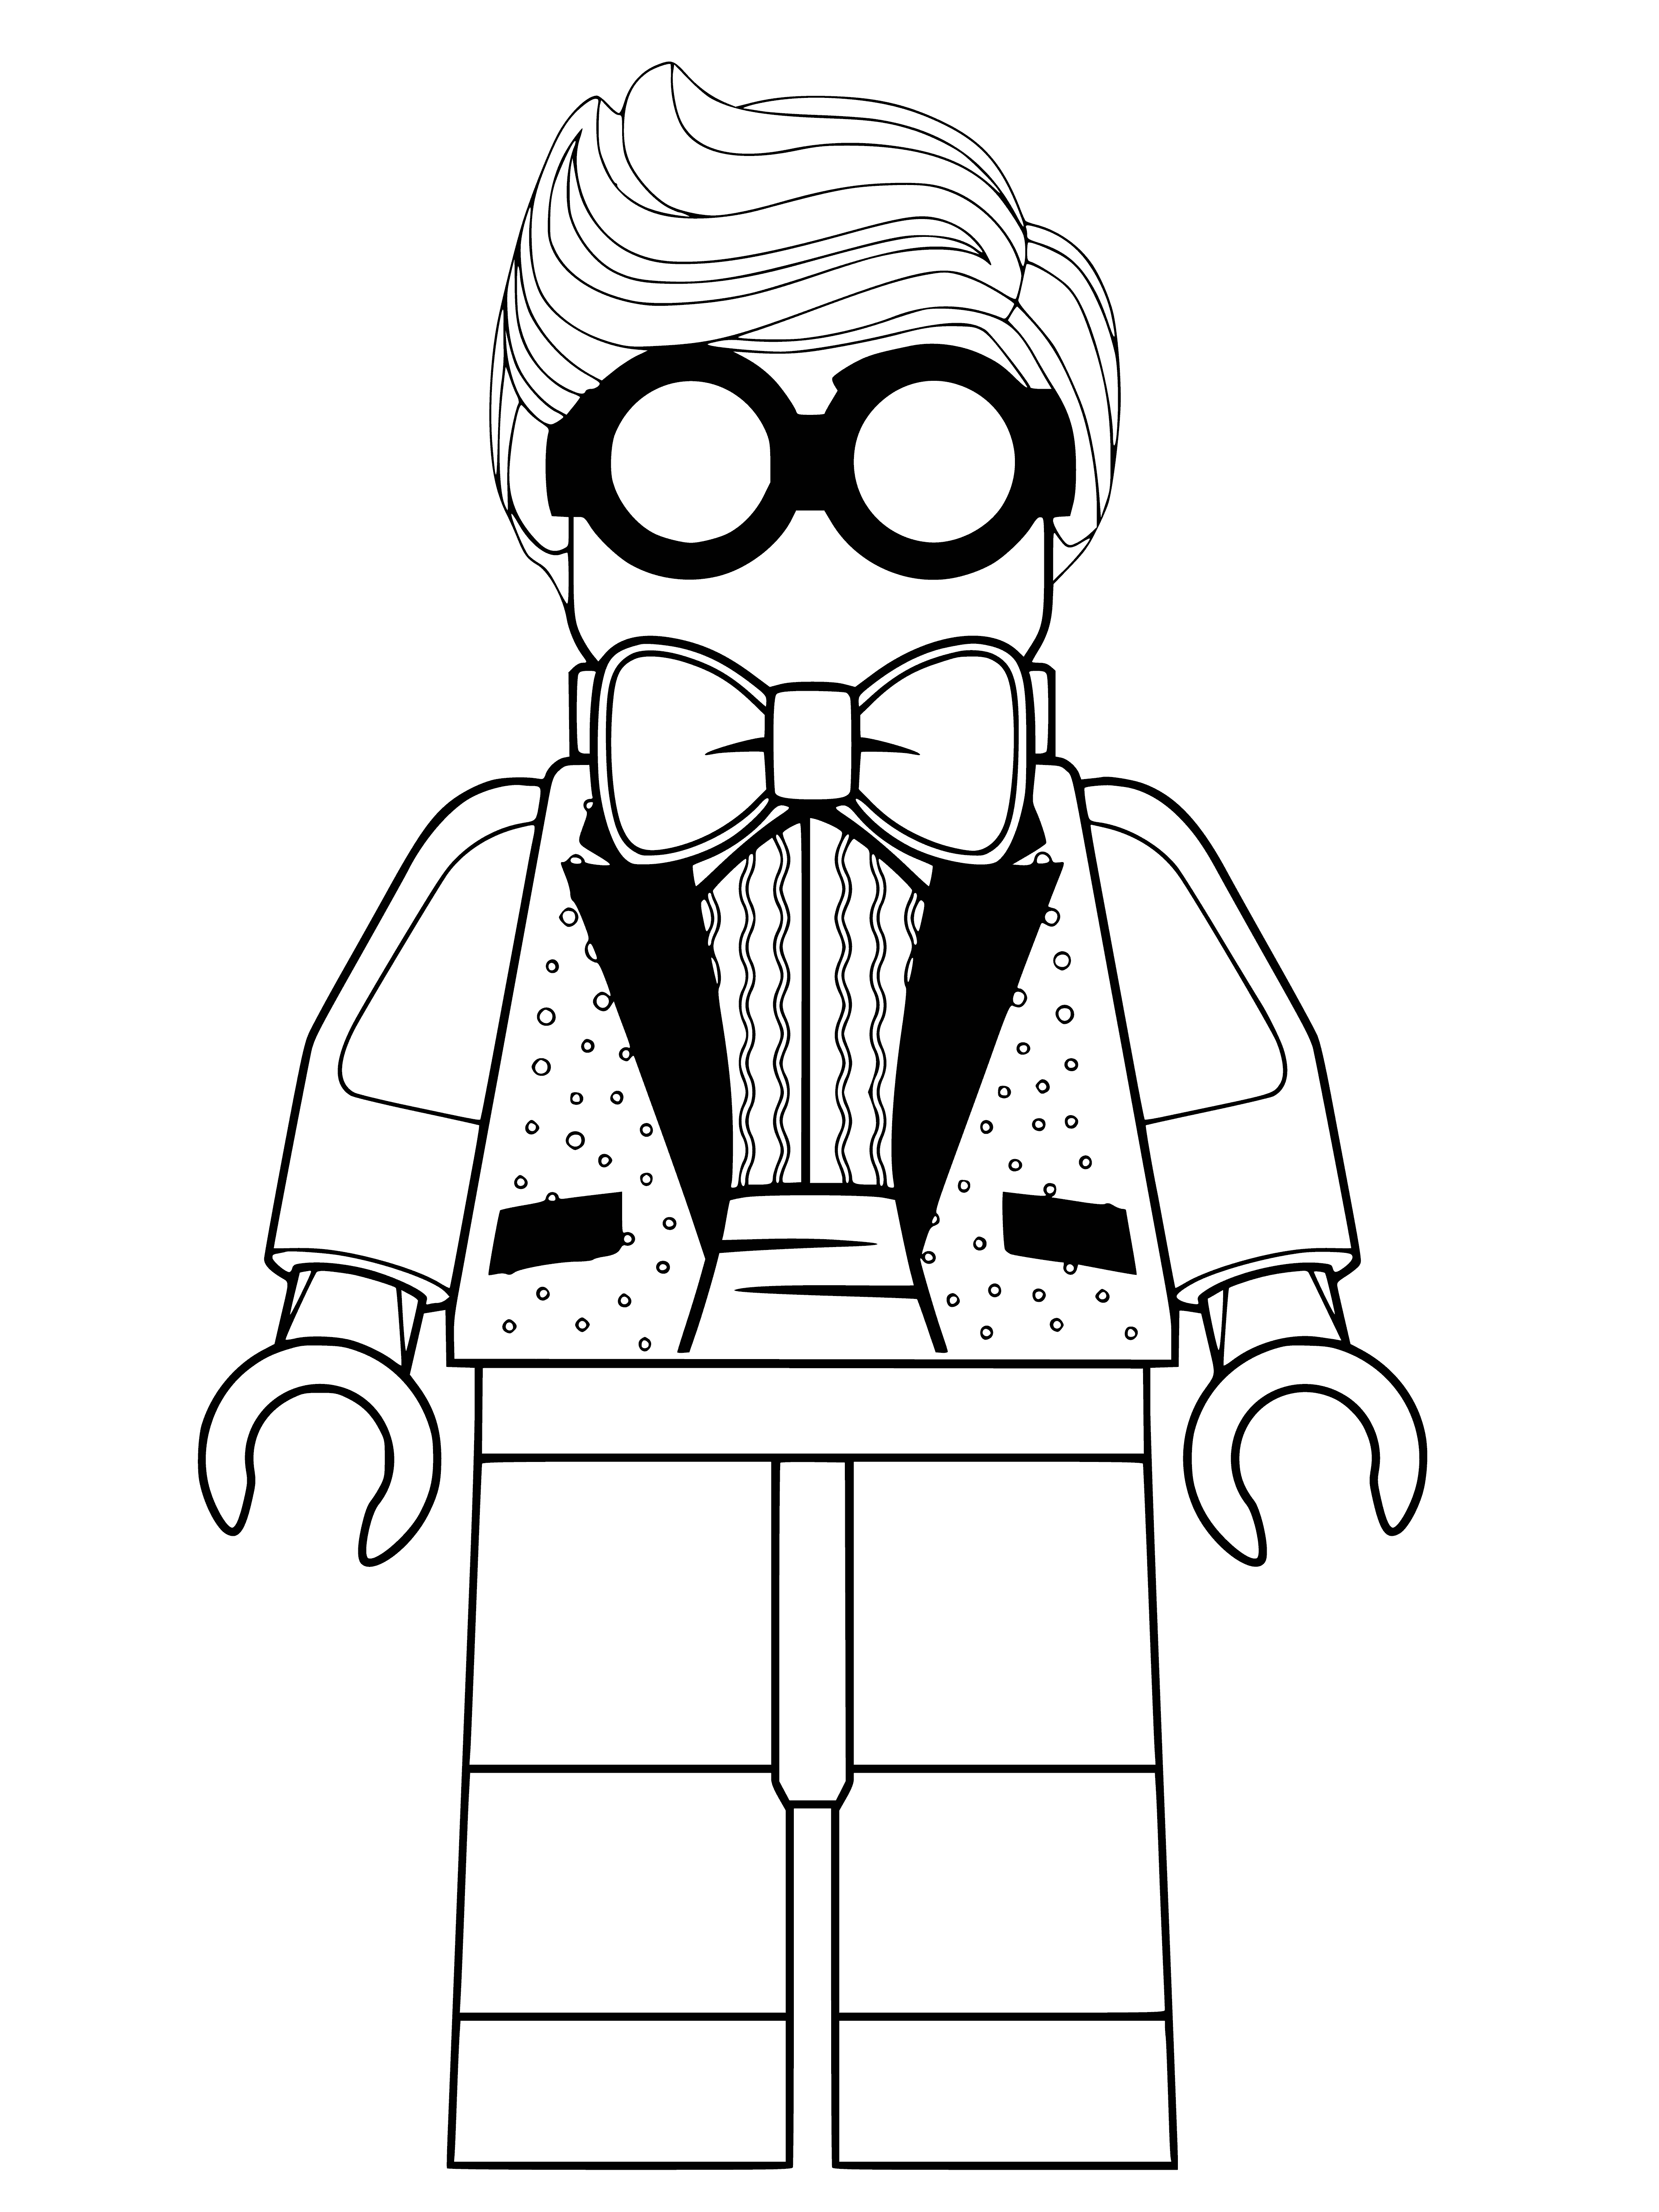 coloring page: Dick Grayson goes undercover as LEGO Batman, with blue and grey suit, yellow belt and blue cape. He overlooks a bustling cityscape.